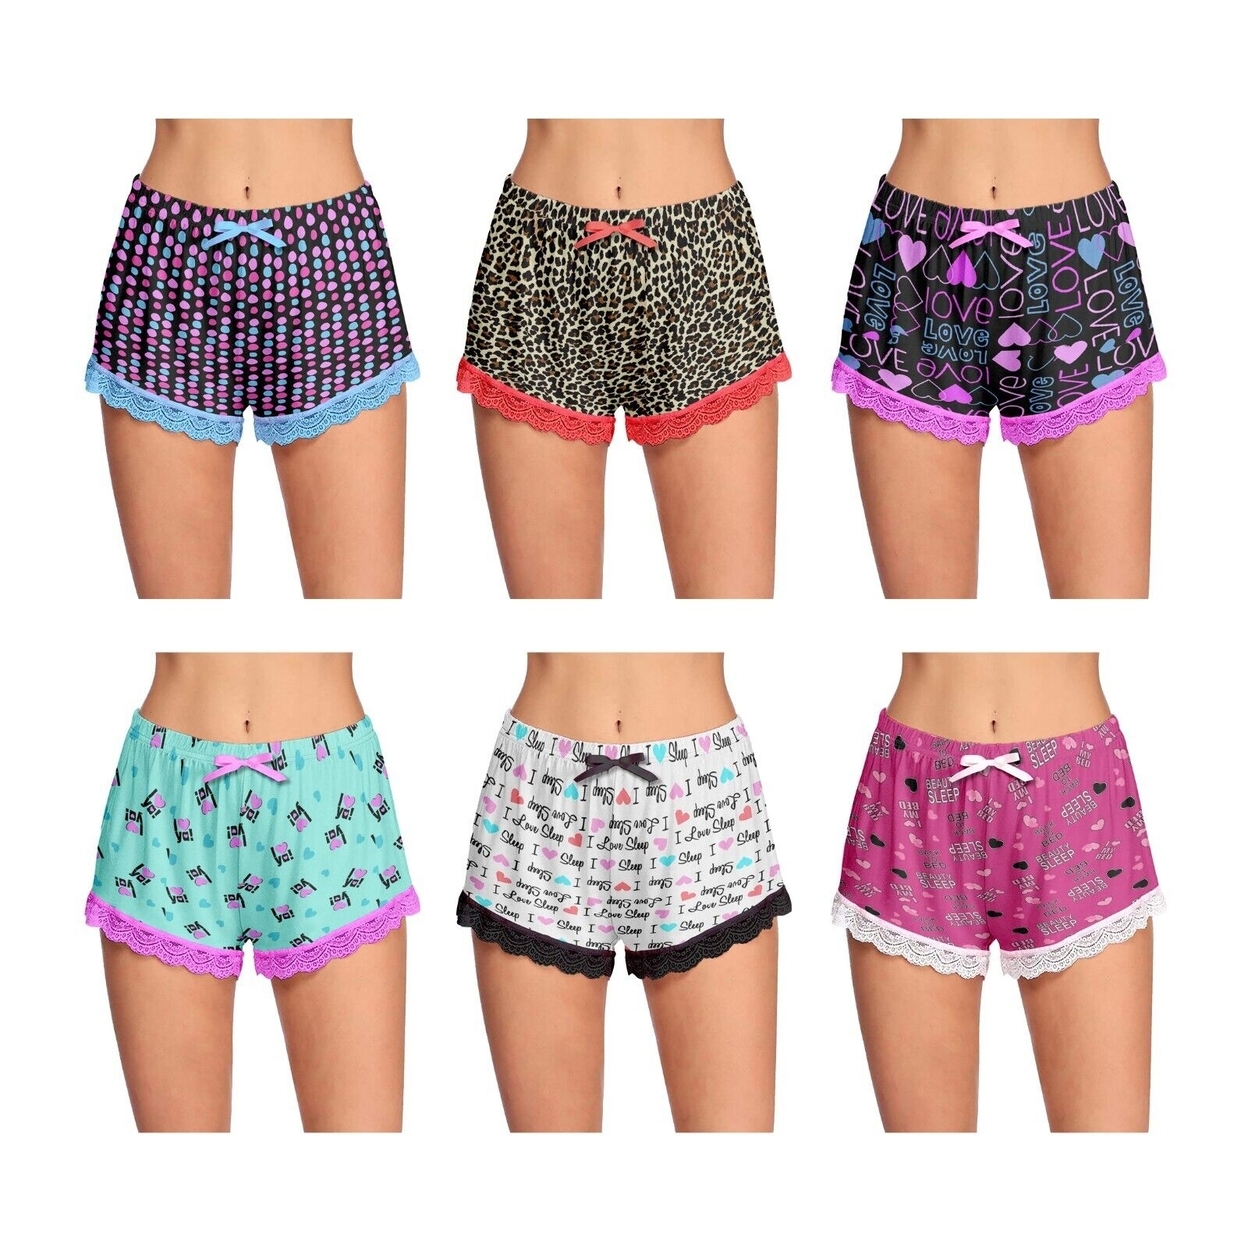 3-Pack: Women's Ultra-Soft Cozy Fun Printed Lace Trim Pajama Lounge Shorts - Small, Love